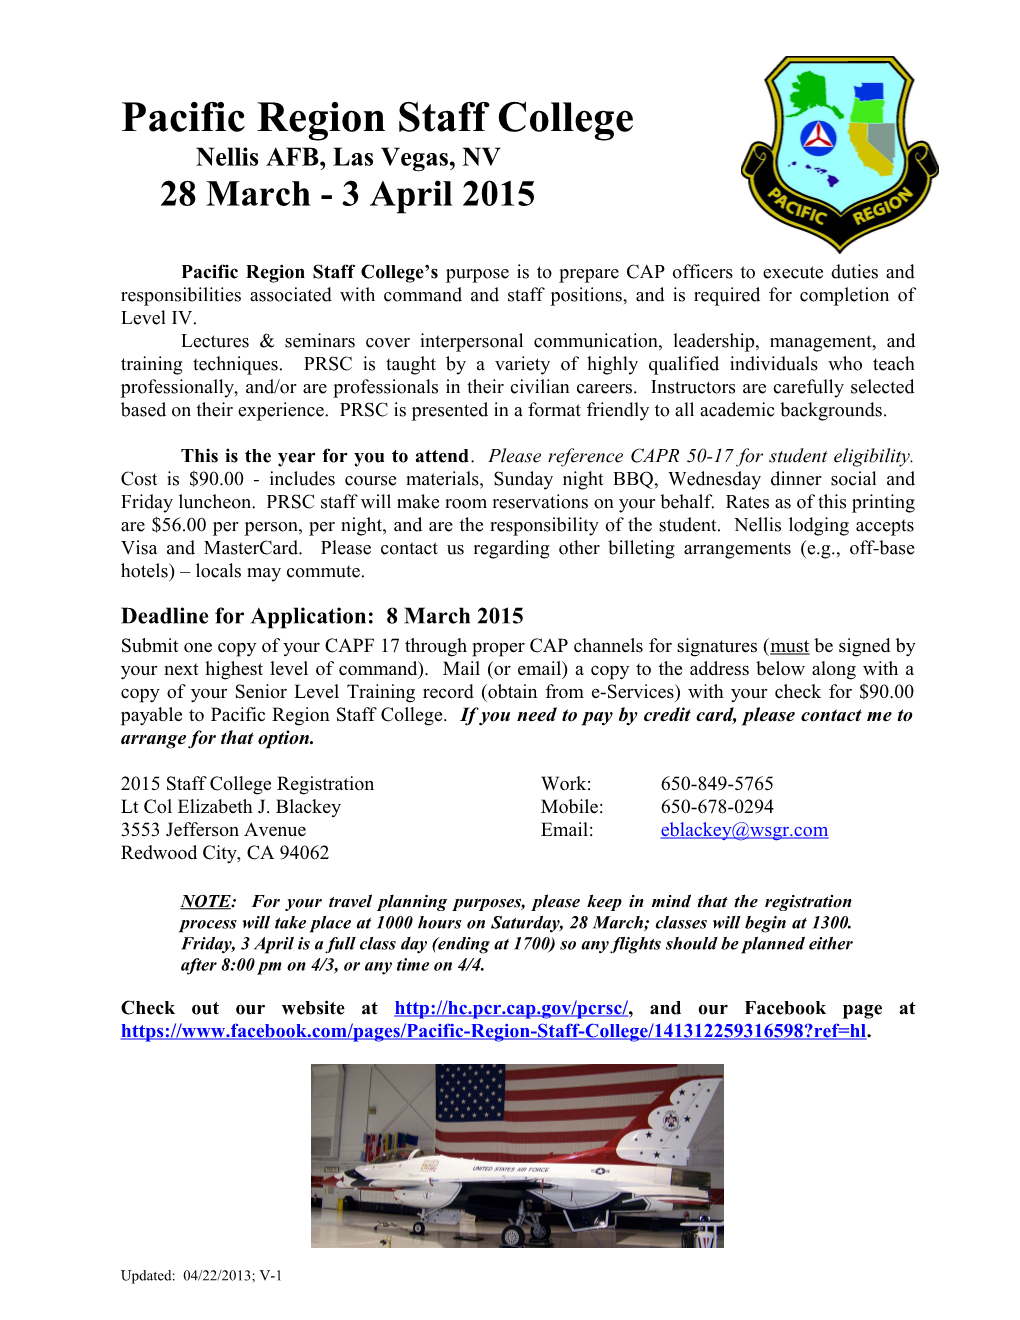 Deadline for Application: 8 March 2015